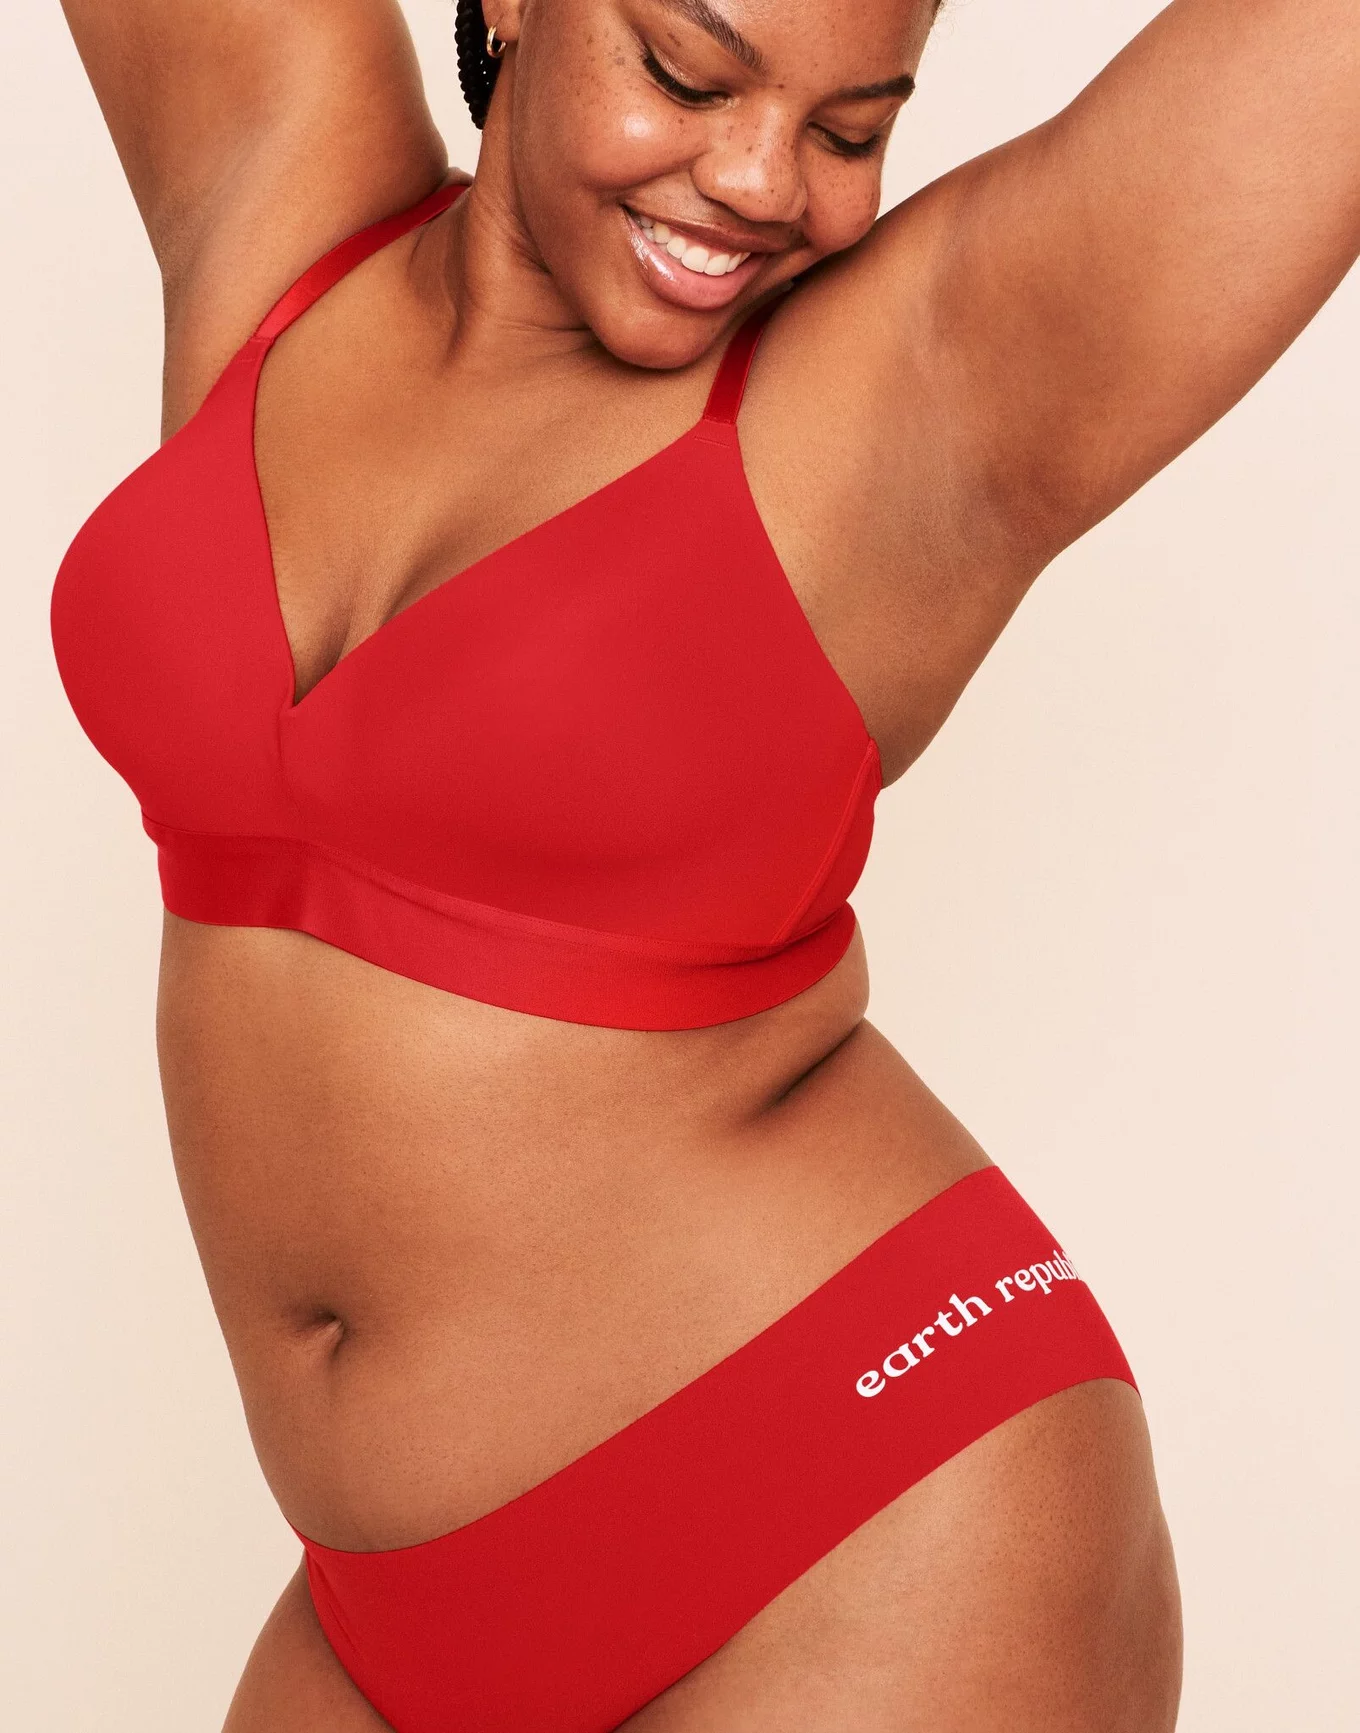 Cacique Red Plus Size Panties for Women